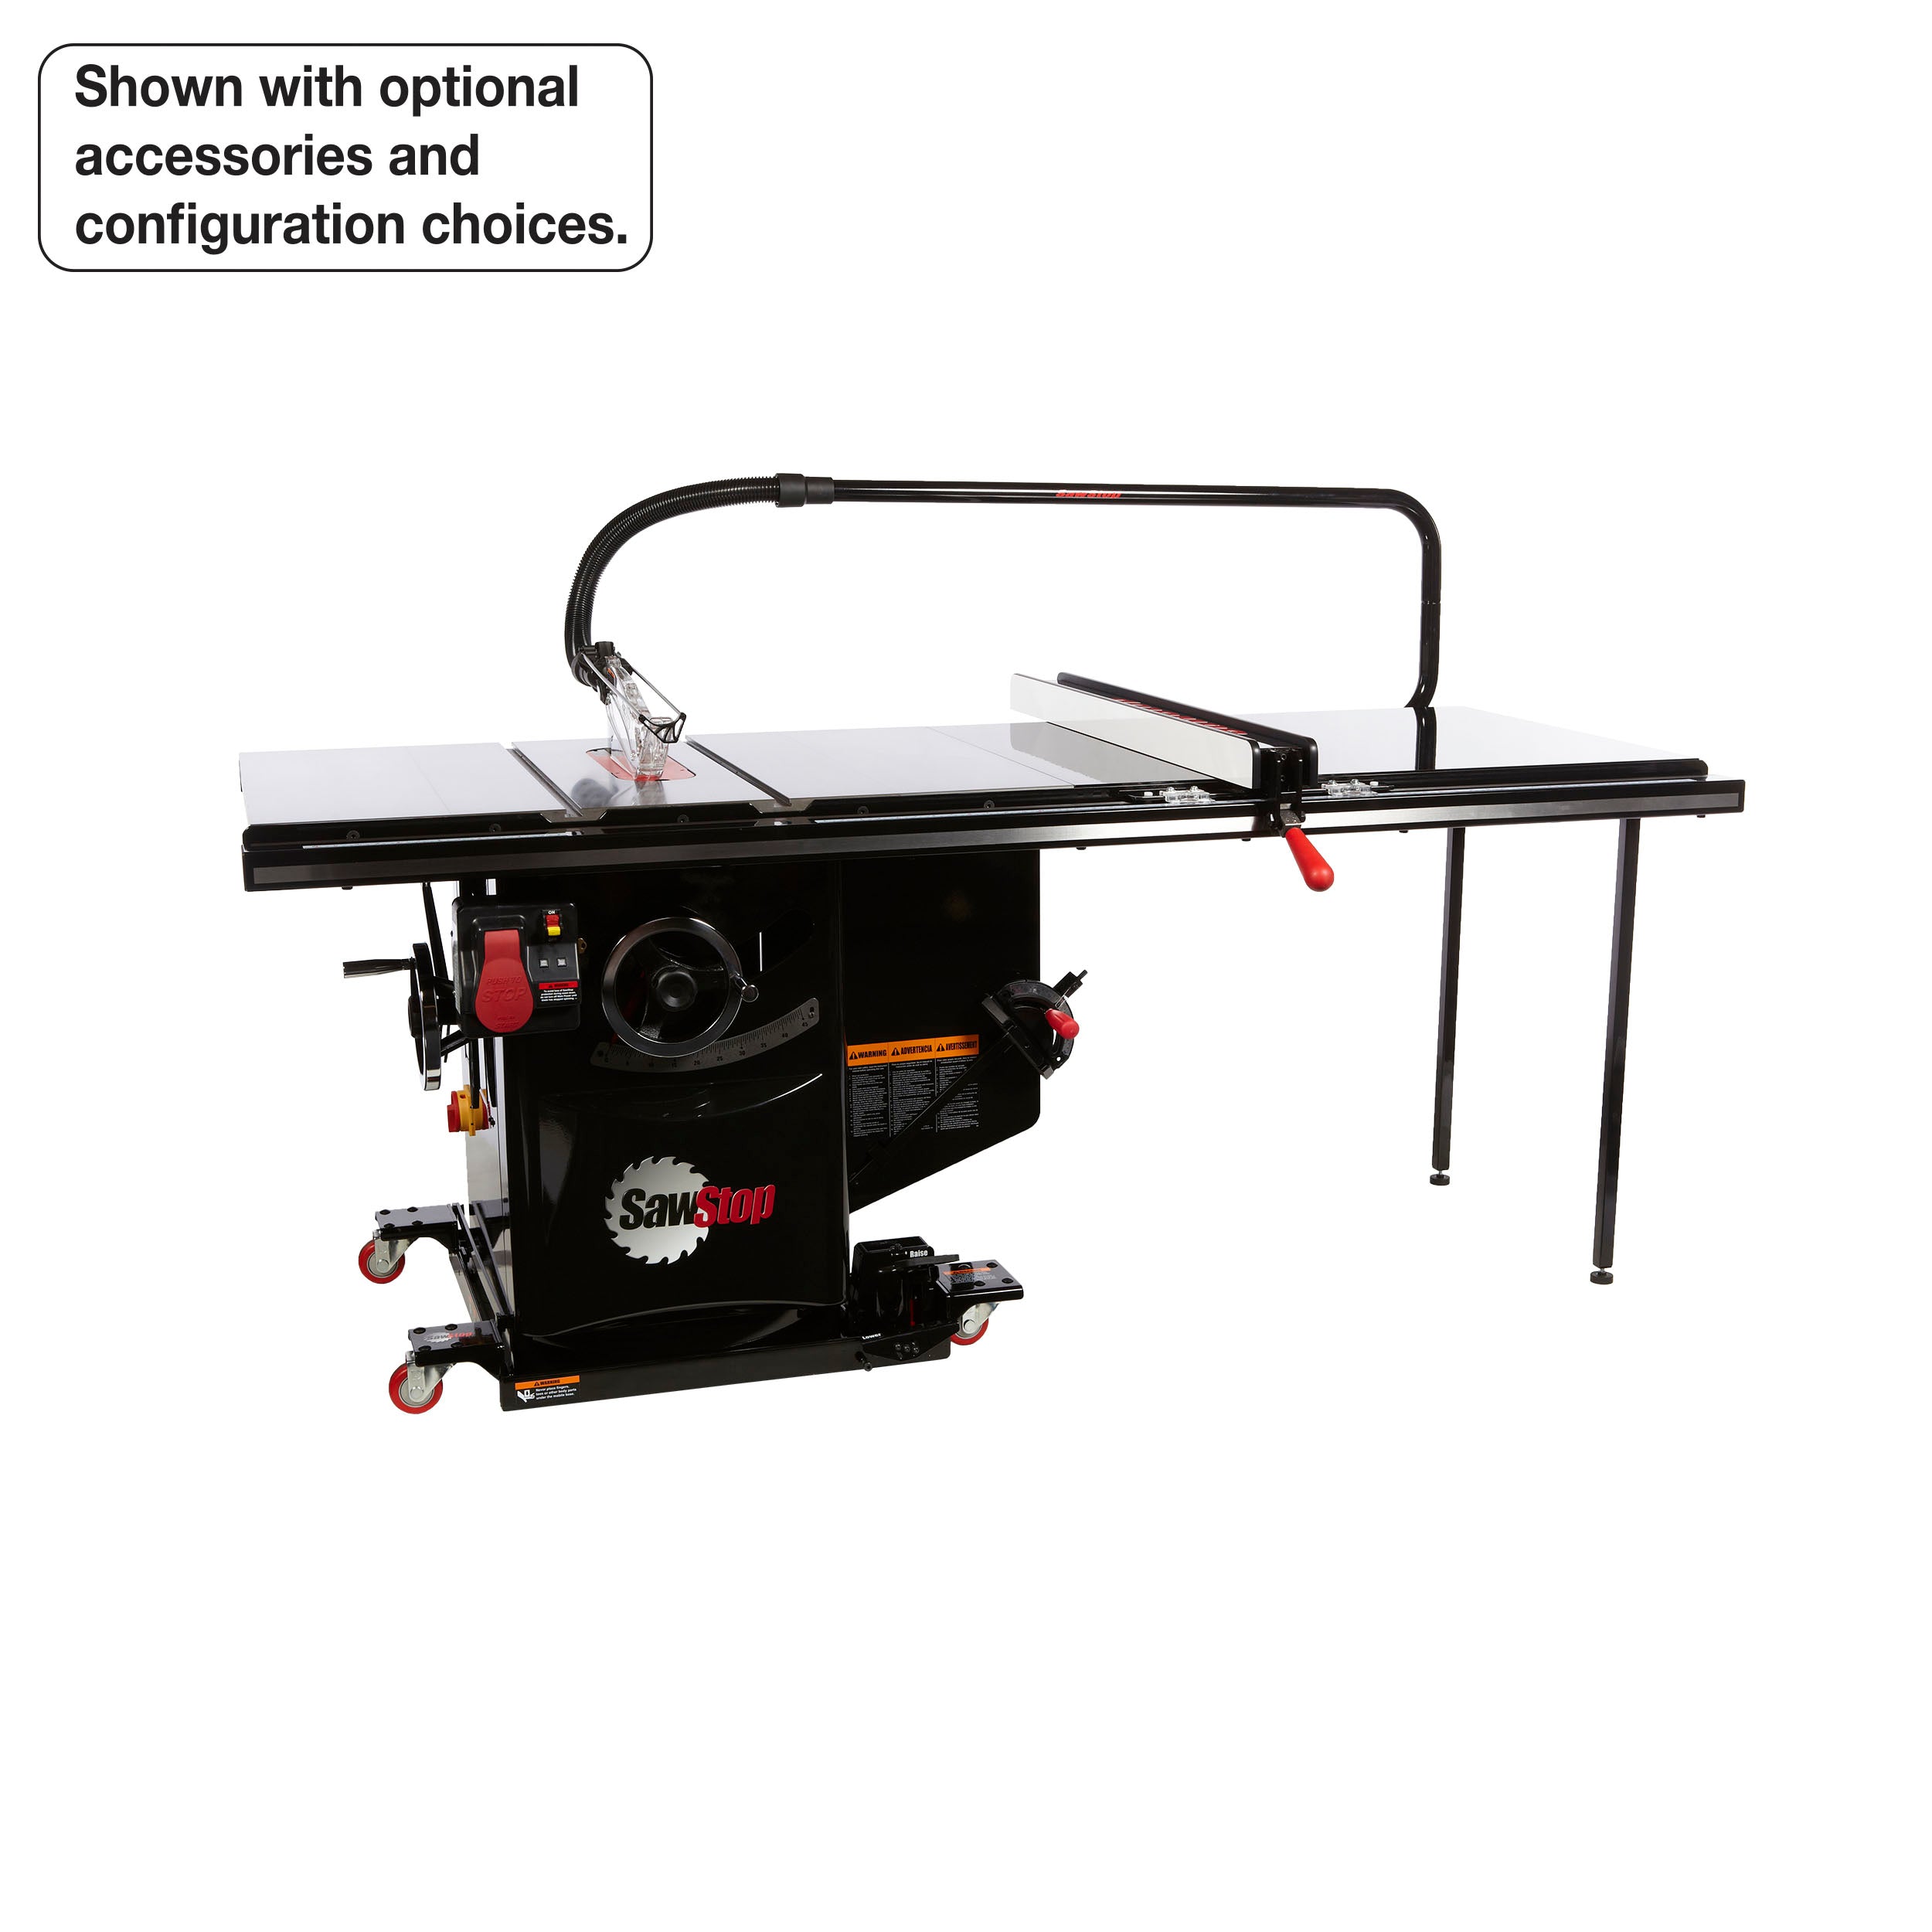 SawStop 7.5HP, 3ph, 230v Industrial Cabinet Saw w/ 52